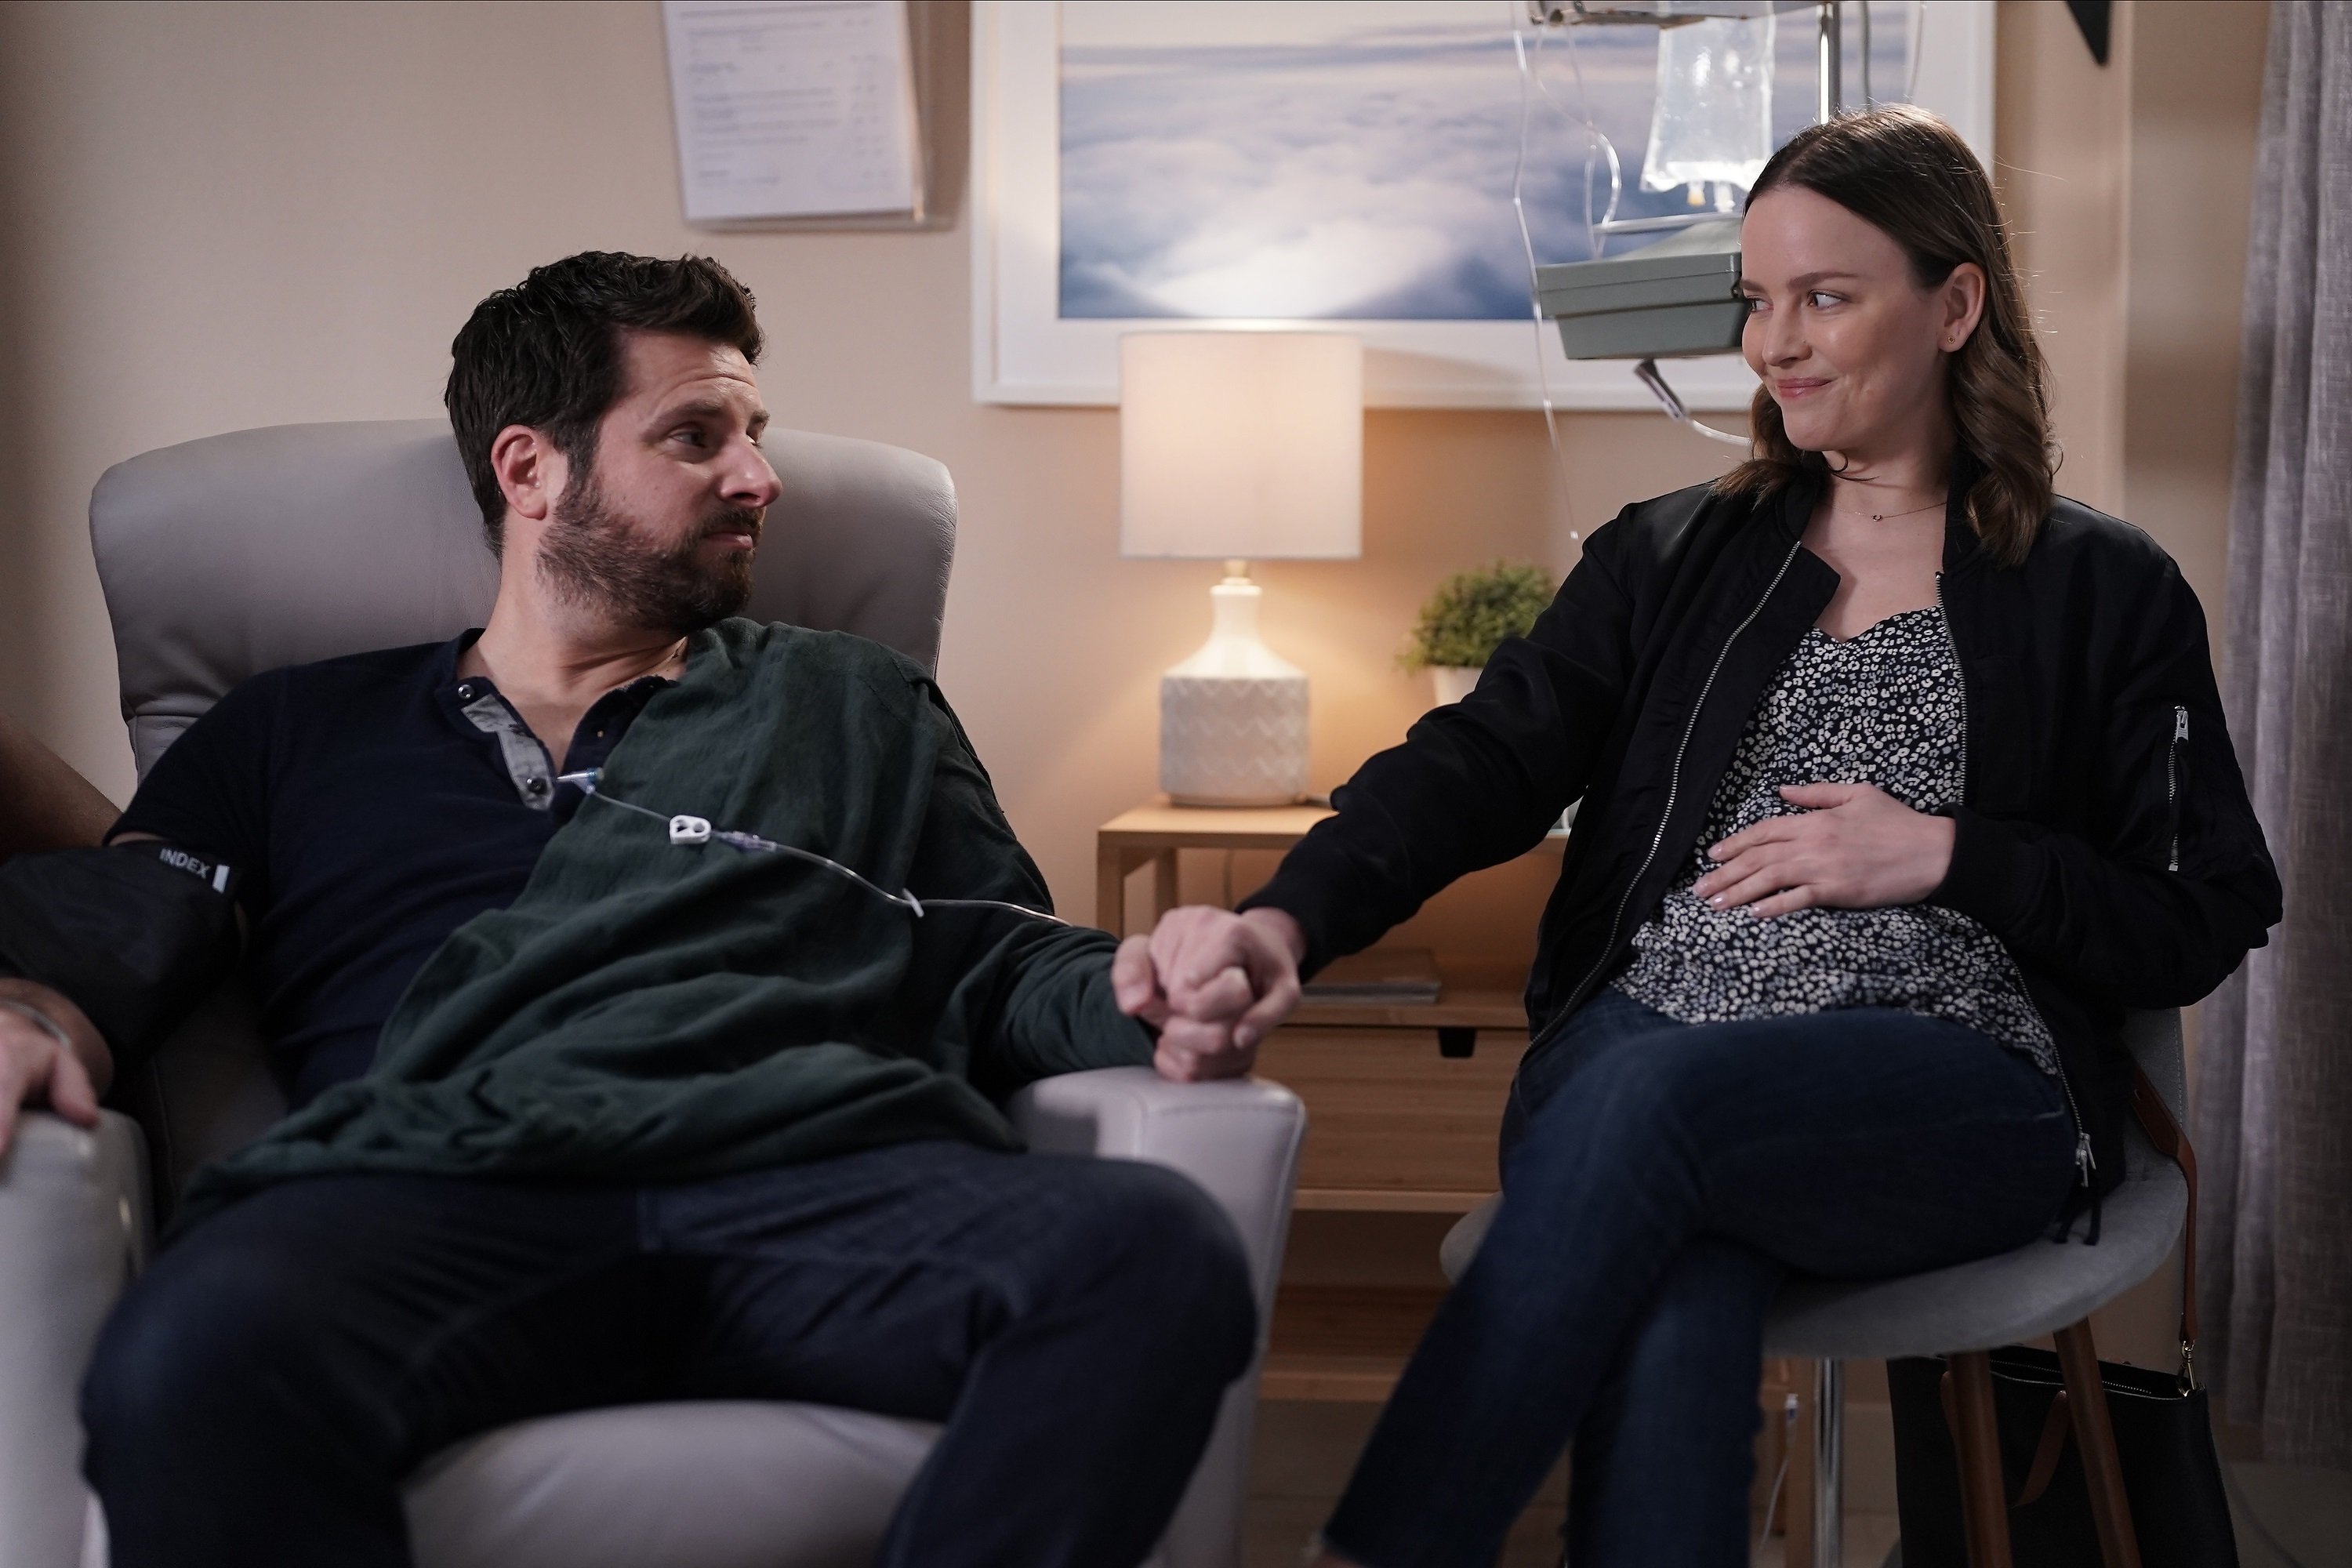 'A Million Little Things' James Roday Rodriguez as Gary and Allison Miller as Maggie Bloom sitting together holding hands while smiling